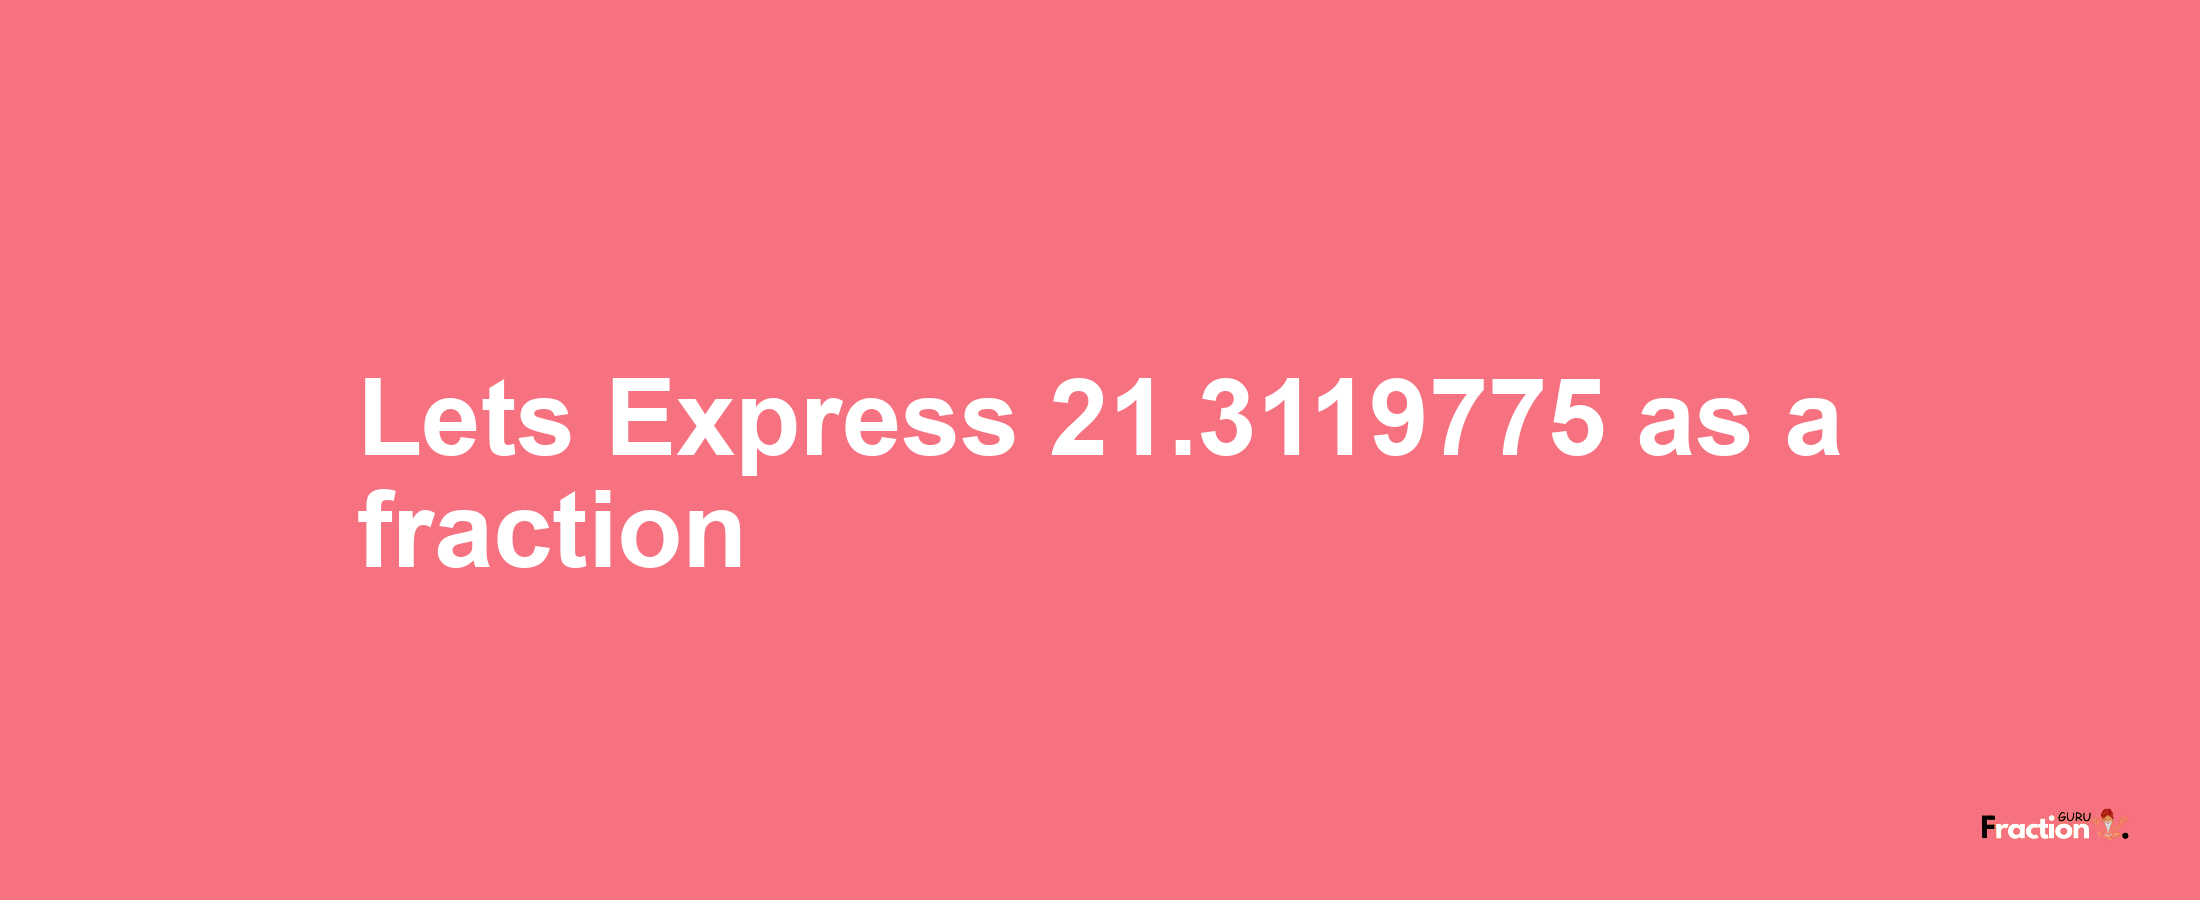 Lets Express 21.3119775 as afraction